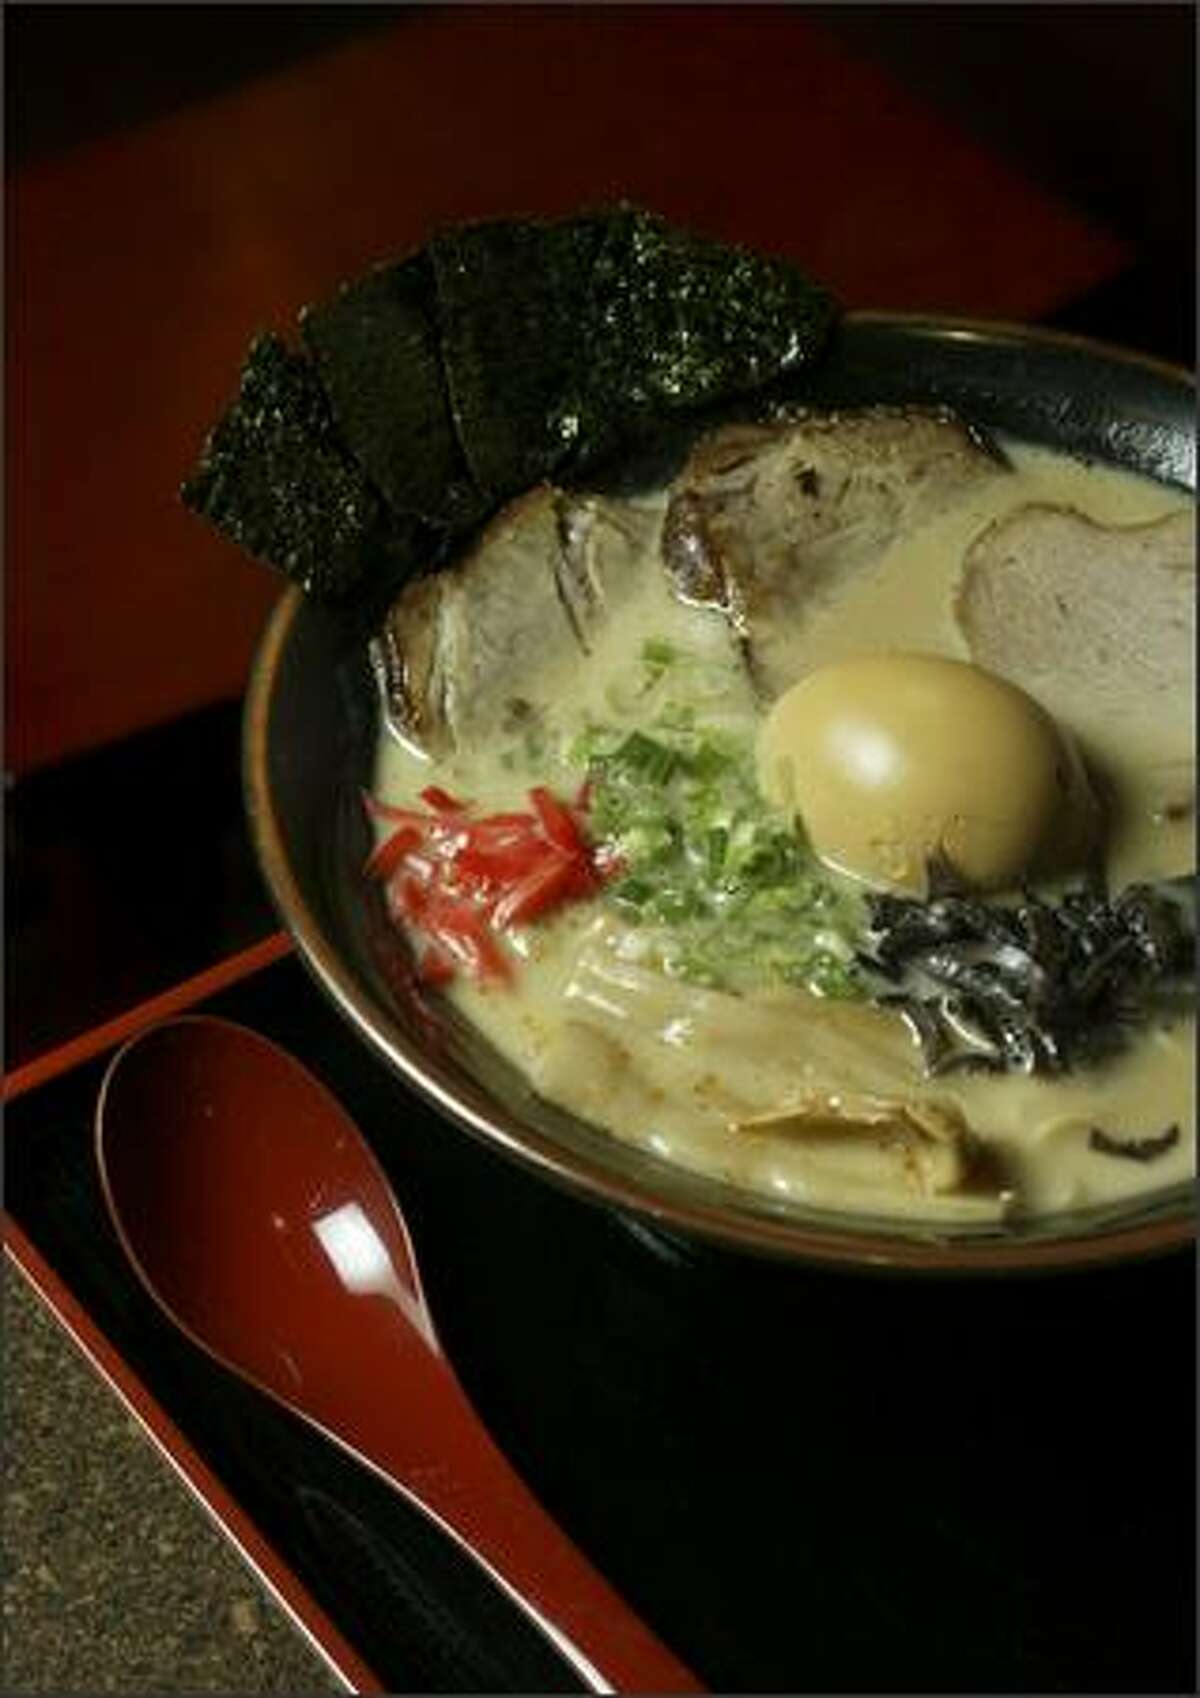 The Samurai Armour Bowl can be ordered with pork (above), chicken or fish broth. Toppings include pork slices, green onion, black mushrooms, flavored egg and roasted seaweed.